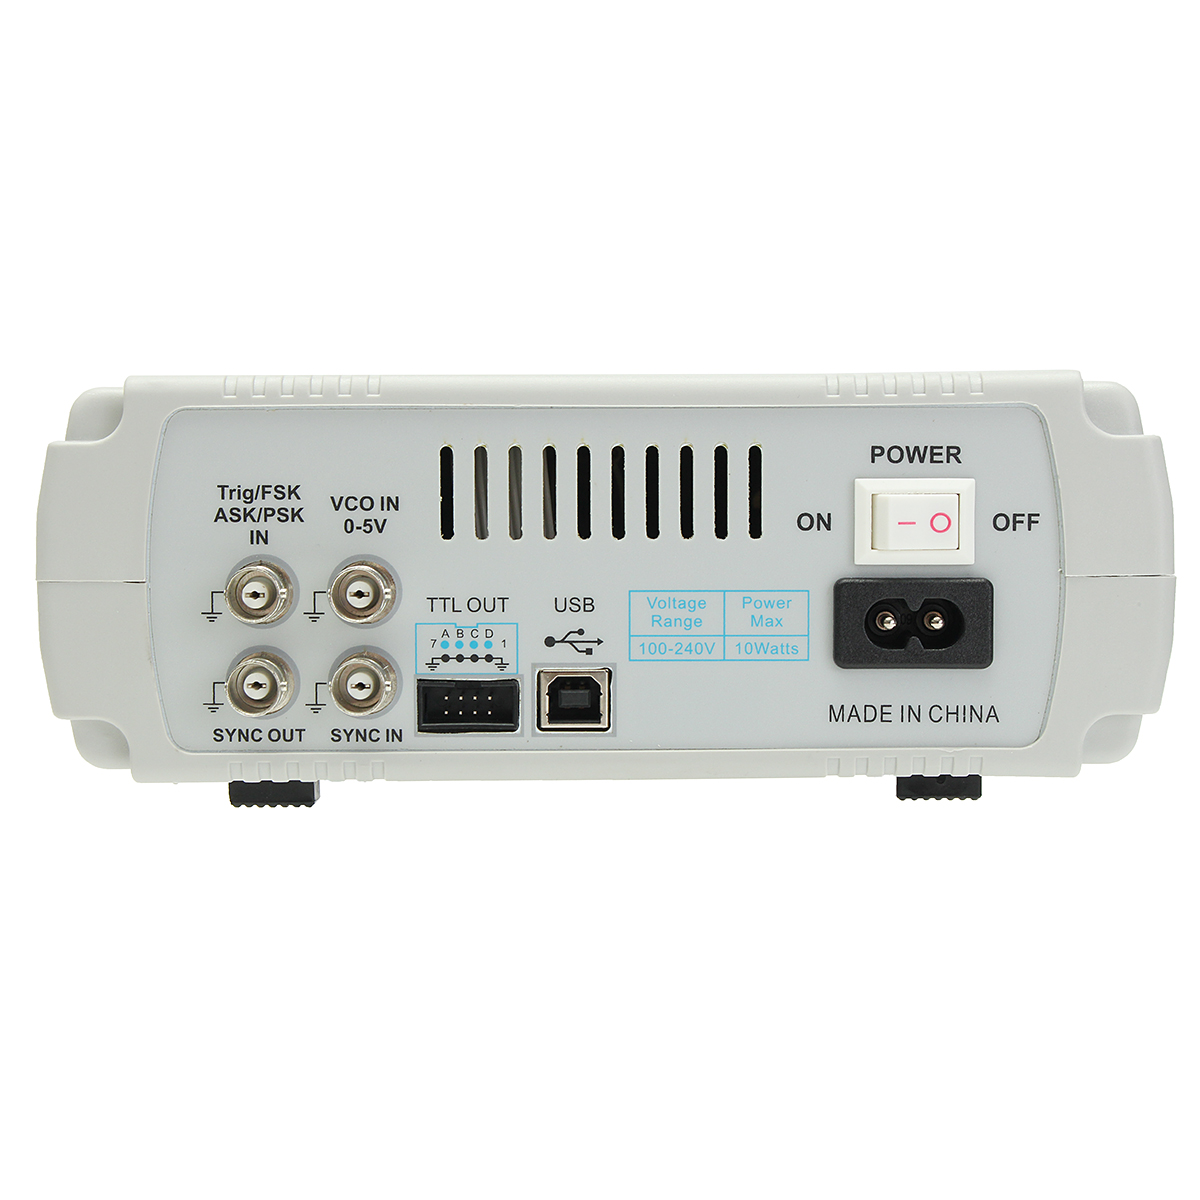 FY6600 Digital 12-60MHz Dual Channel DDS Function Arbitrary Waveform Signal Generator Frequency Meter 41